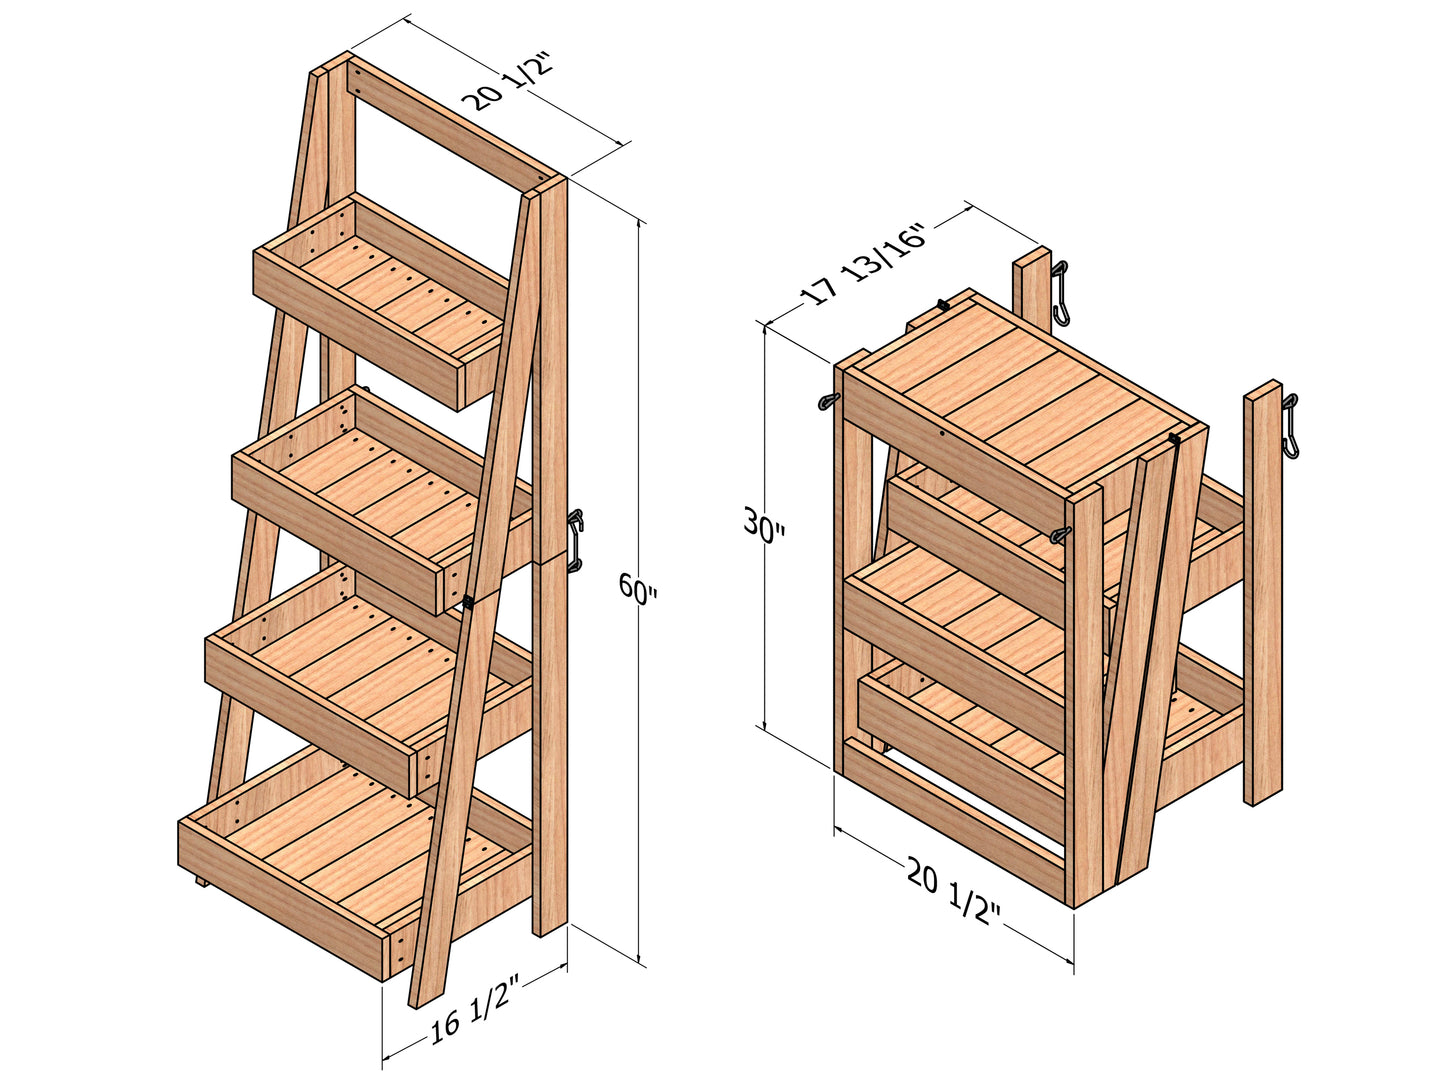 Foldable Wood Stand Plan for DIY Projects